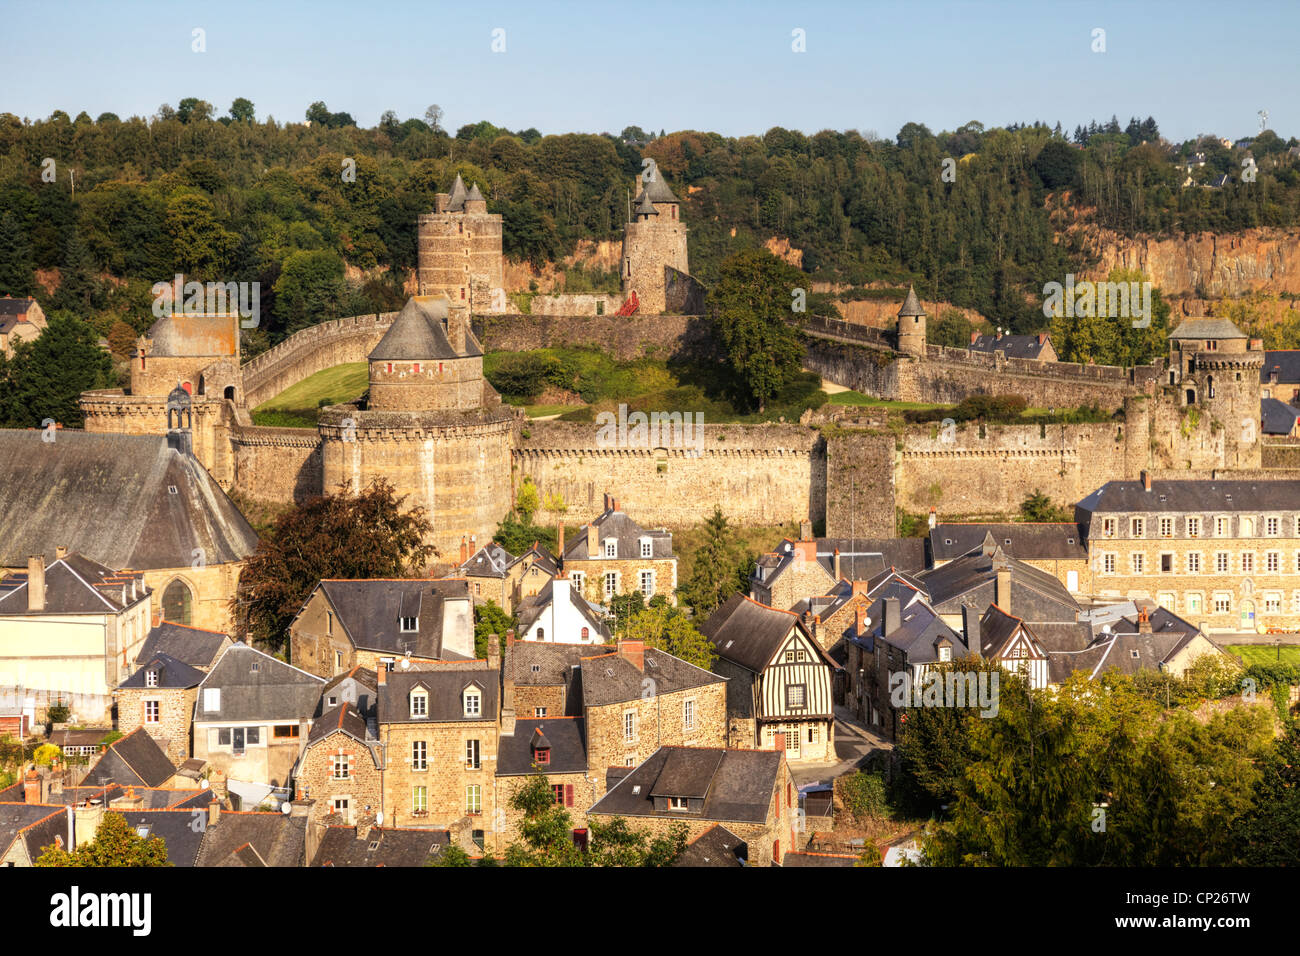 The medieval castle and town of Fougeres, Brittany, France, Stock Photo